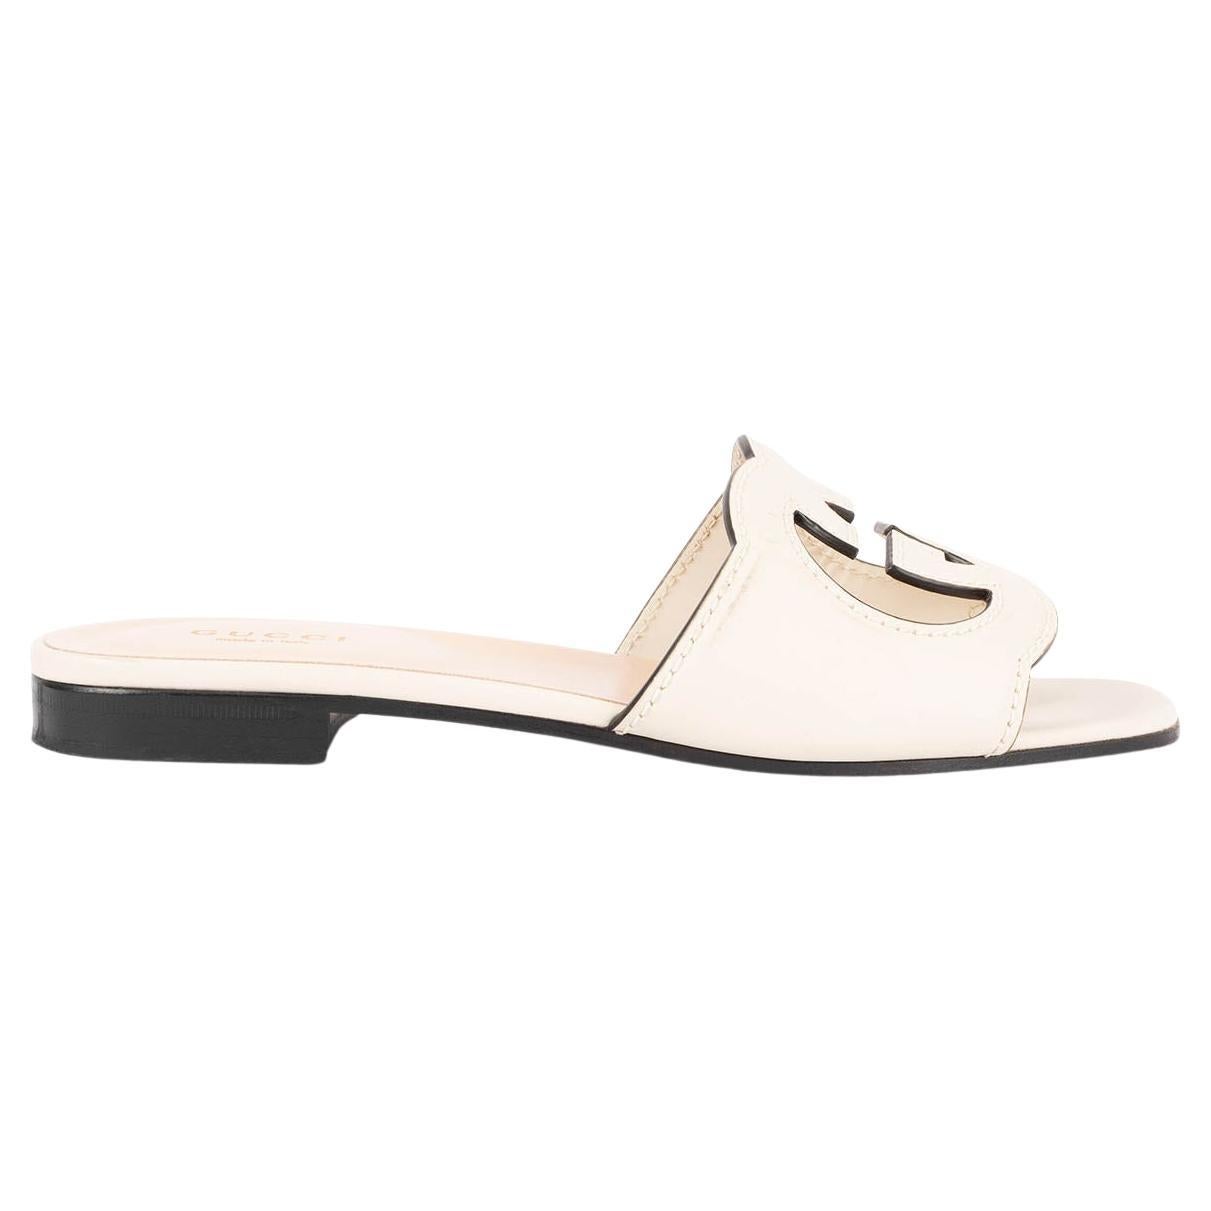 GUCCI cream leather INTERLOCKING G CUT-OUT SLIDE Sandals Shoes 35 For Sale